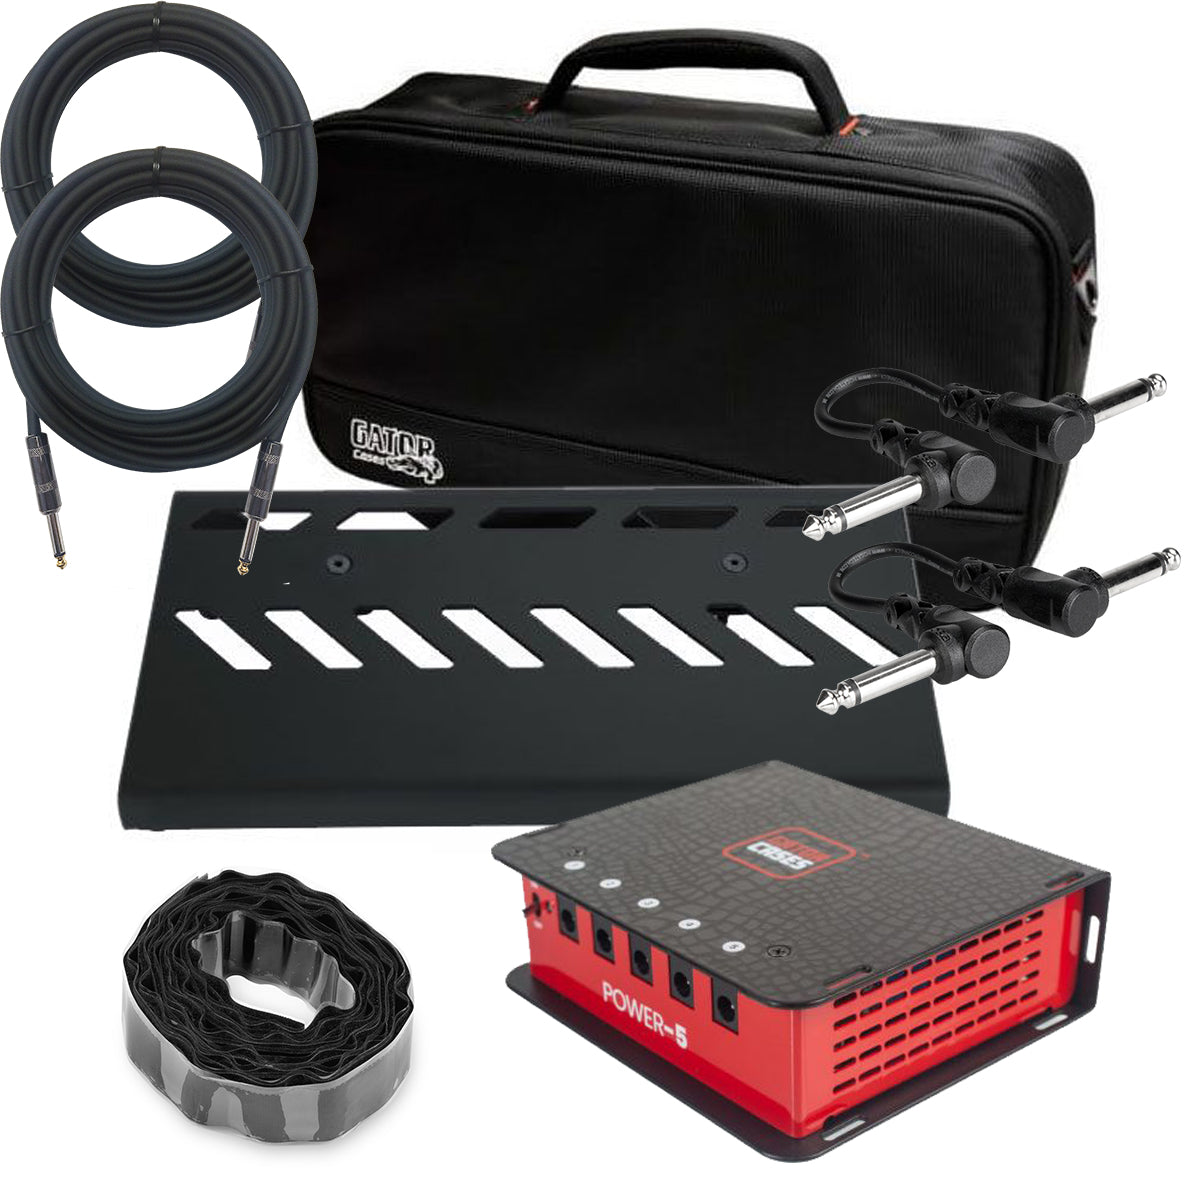 Collage of the components in the Gator Cases GPB-LAK-1 Aluminum Pedal Board w/ Carry Bag - Small, Black POWER KIT bundle